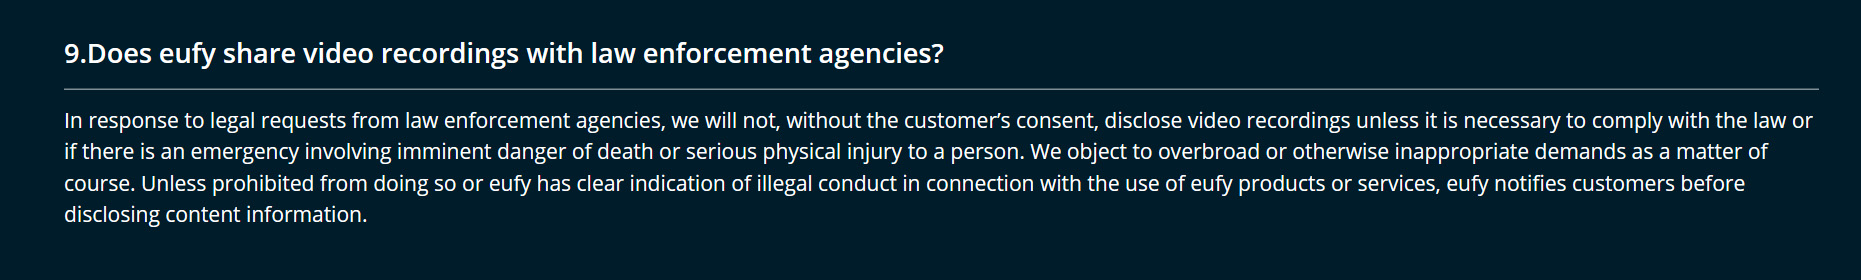 The removed statement on sharing footage with law enforcement on Eufy's Privacy Policy page